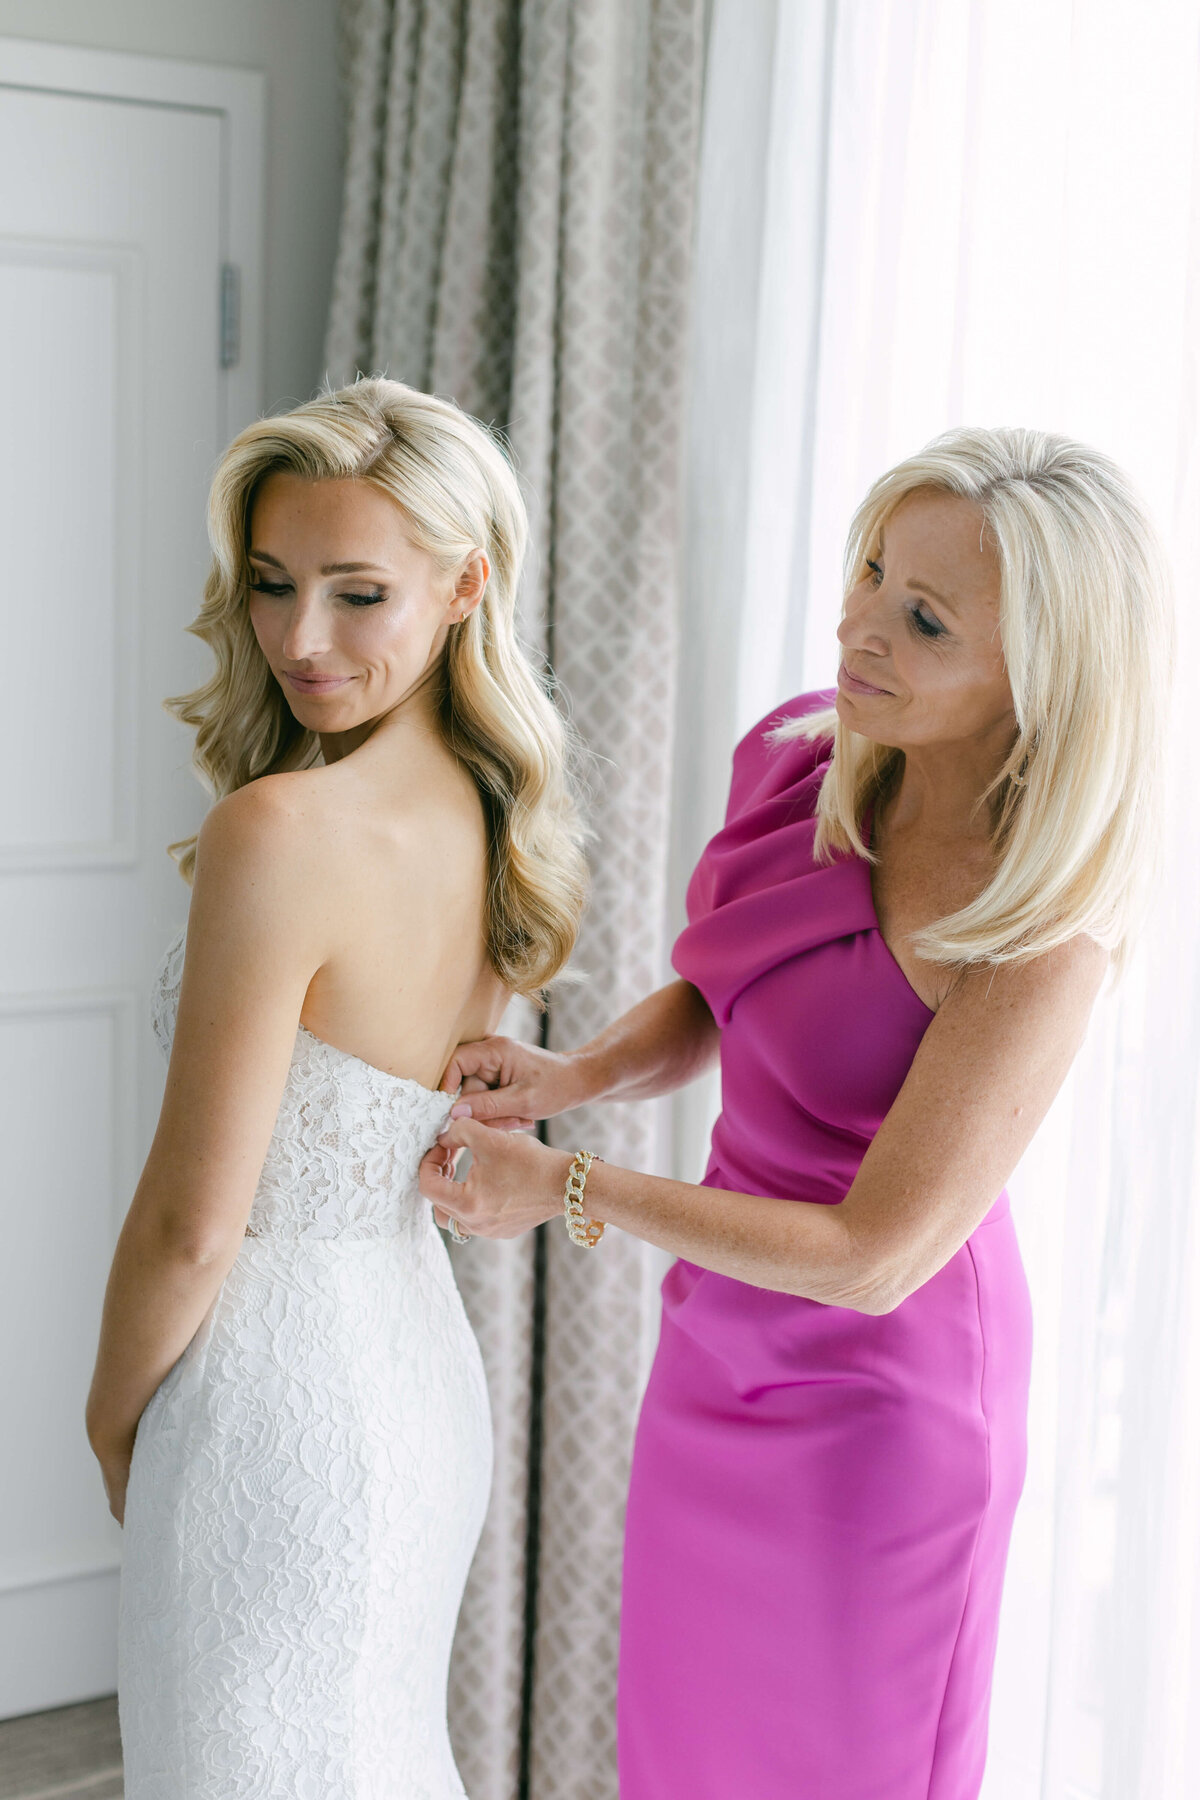 A mother helps her daughter into her wedding dress.